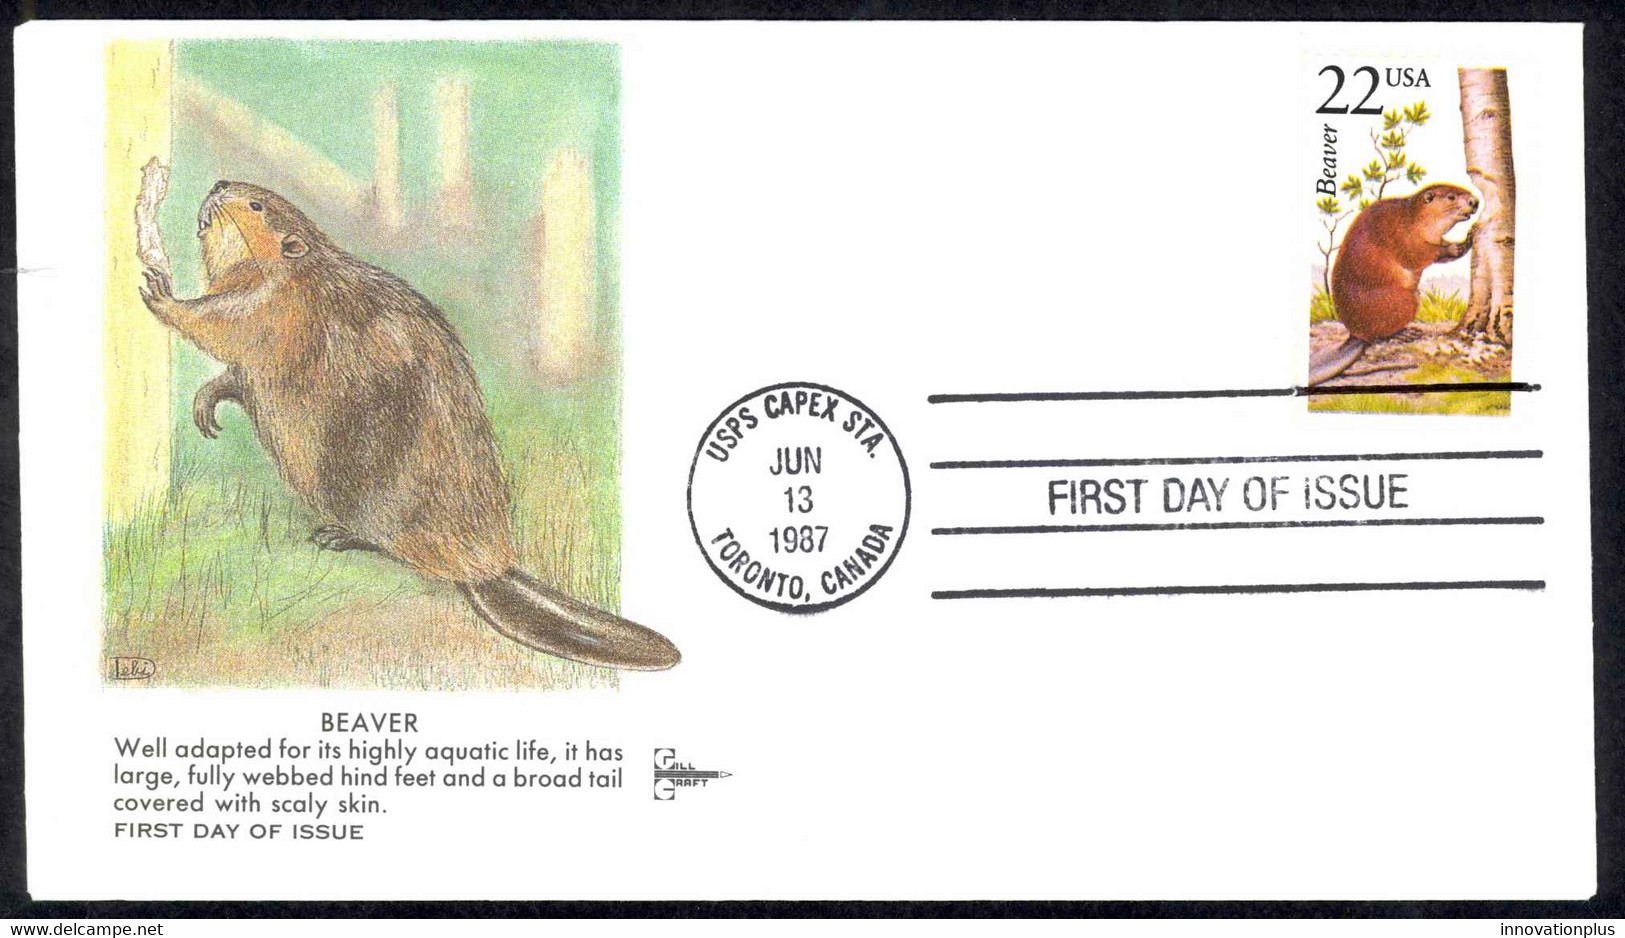 USA Sc# 2316 (Gill Craft) FDC (USPS CAPEX STATION) 1987 6.13 Beaver - 1981-1990